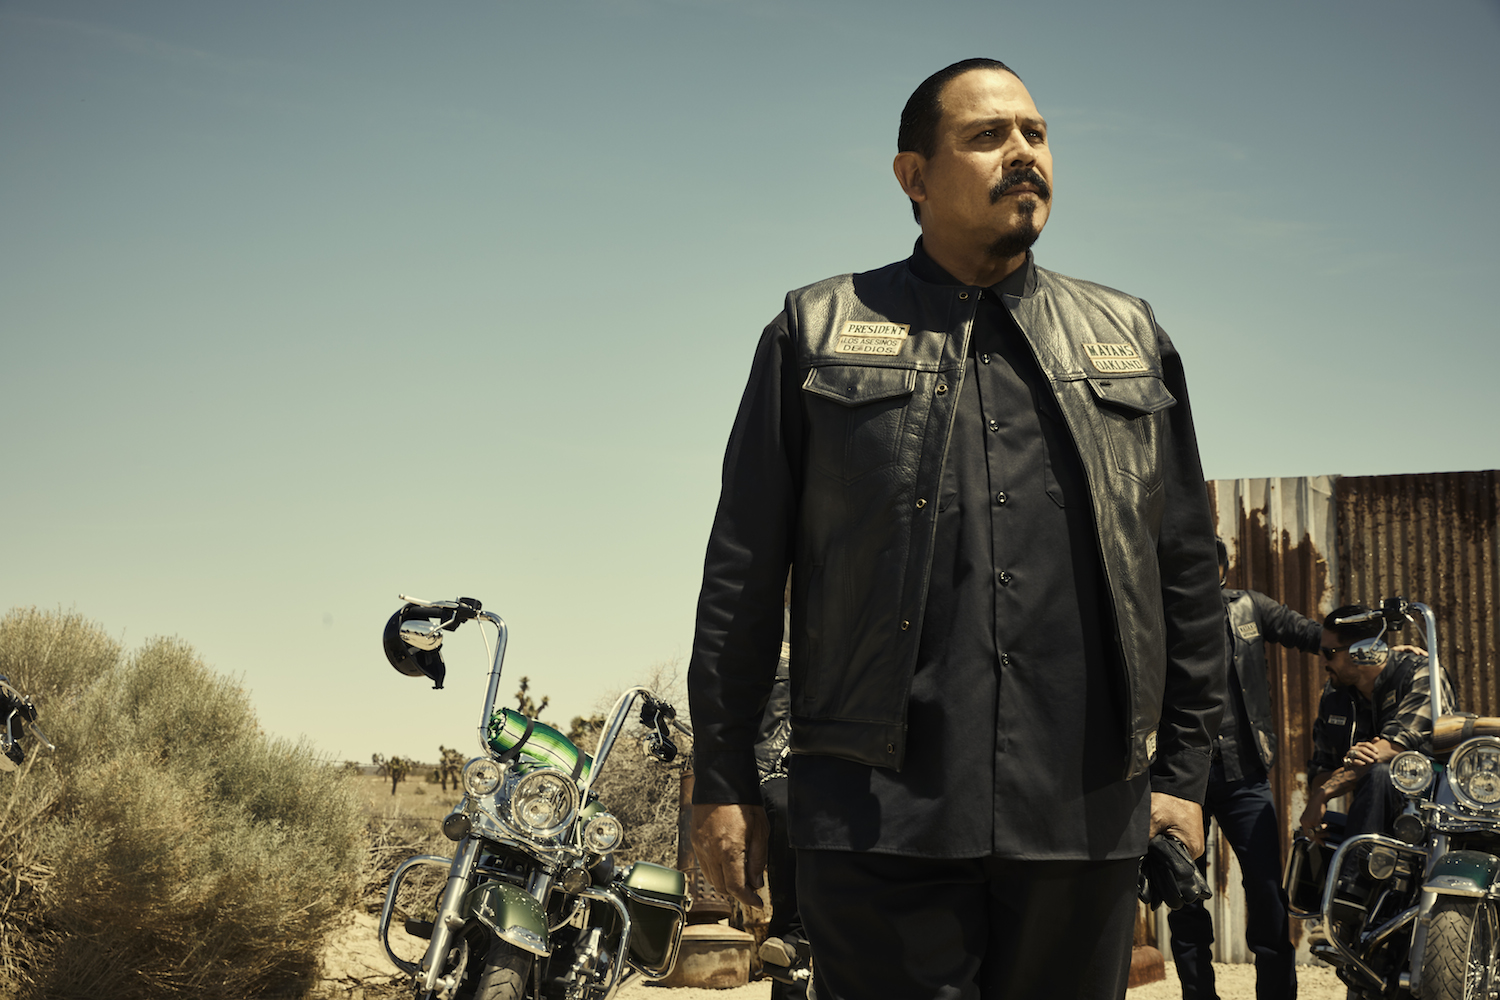 When Is The Next Episode Of Mayans Mc First Trailer for ‘Sons of Anarchy’ Spinoff ‘Mayans MC’ Is Finally Here